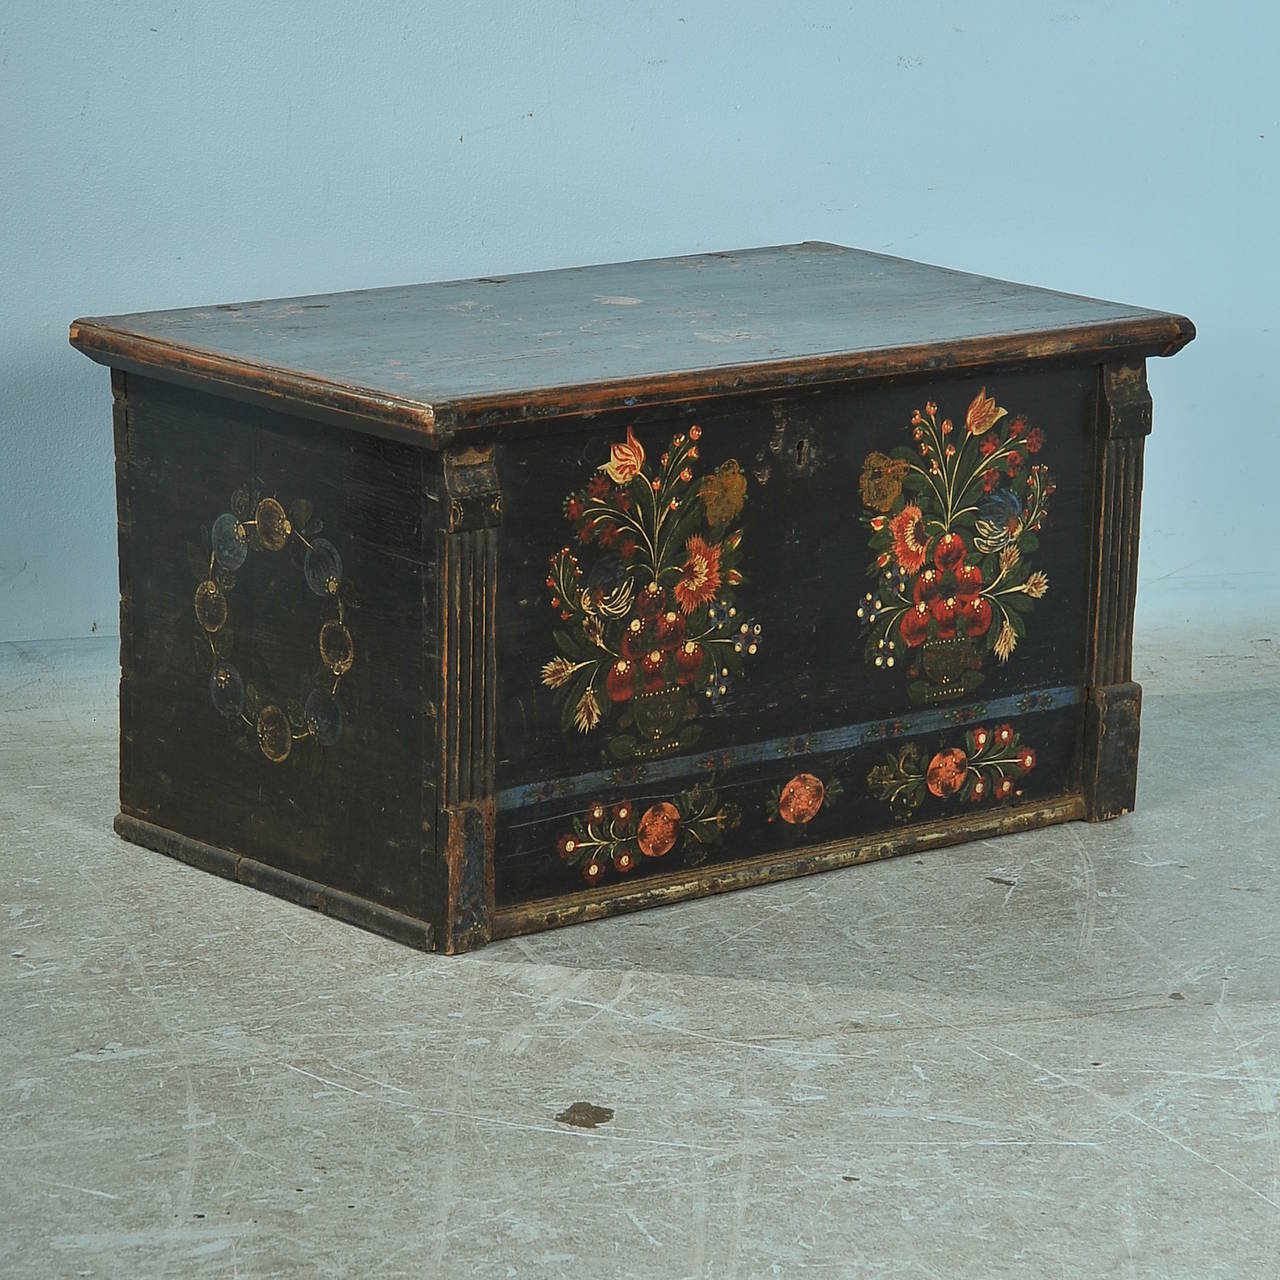 Exceptional paint and exquisite detail are the hallmarks of this lovely painted flat top trunk from Hungary. The coloring is beautiful, with black, green, blue, ocher, burnt orange and deep red details. Note the soft quality of the 